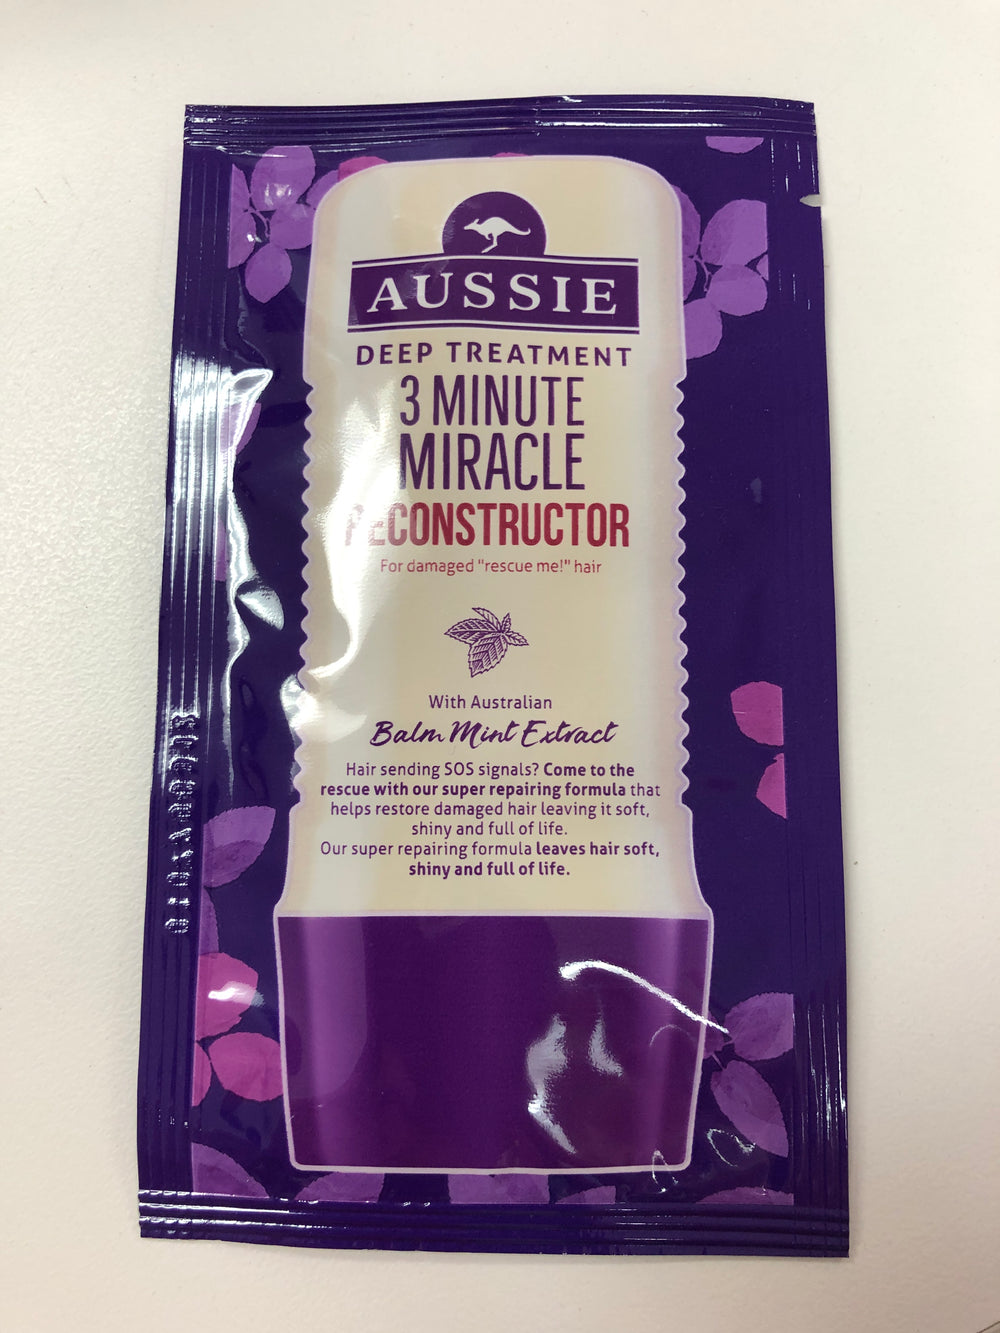 3 Minute Miracle Reconstructor 20ml